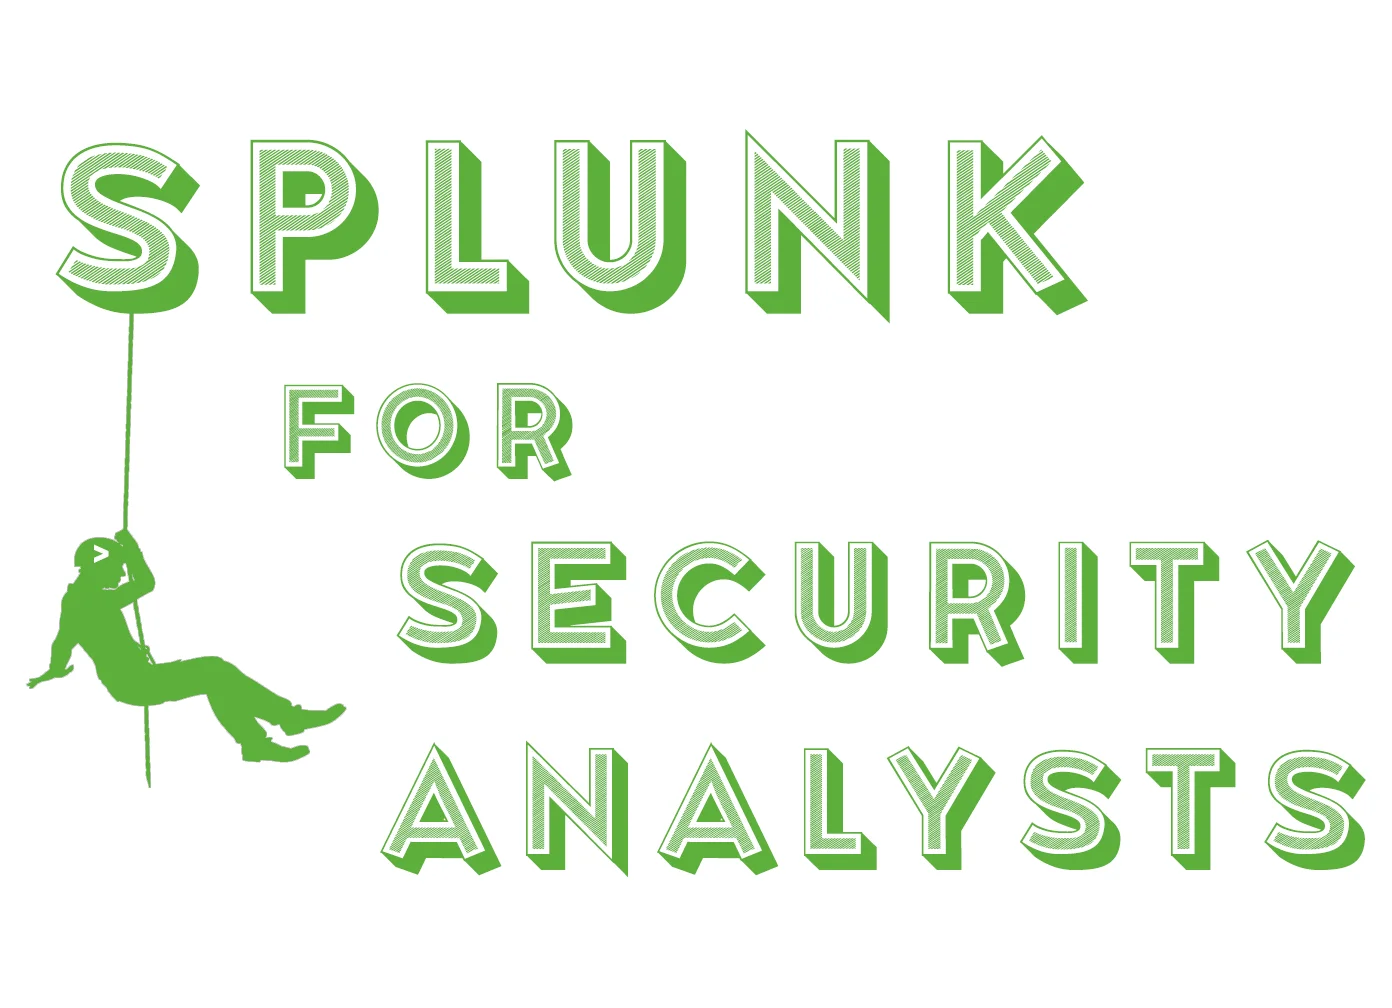 Splunk for Security Analysts